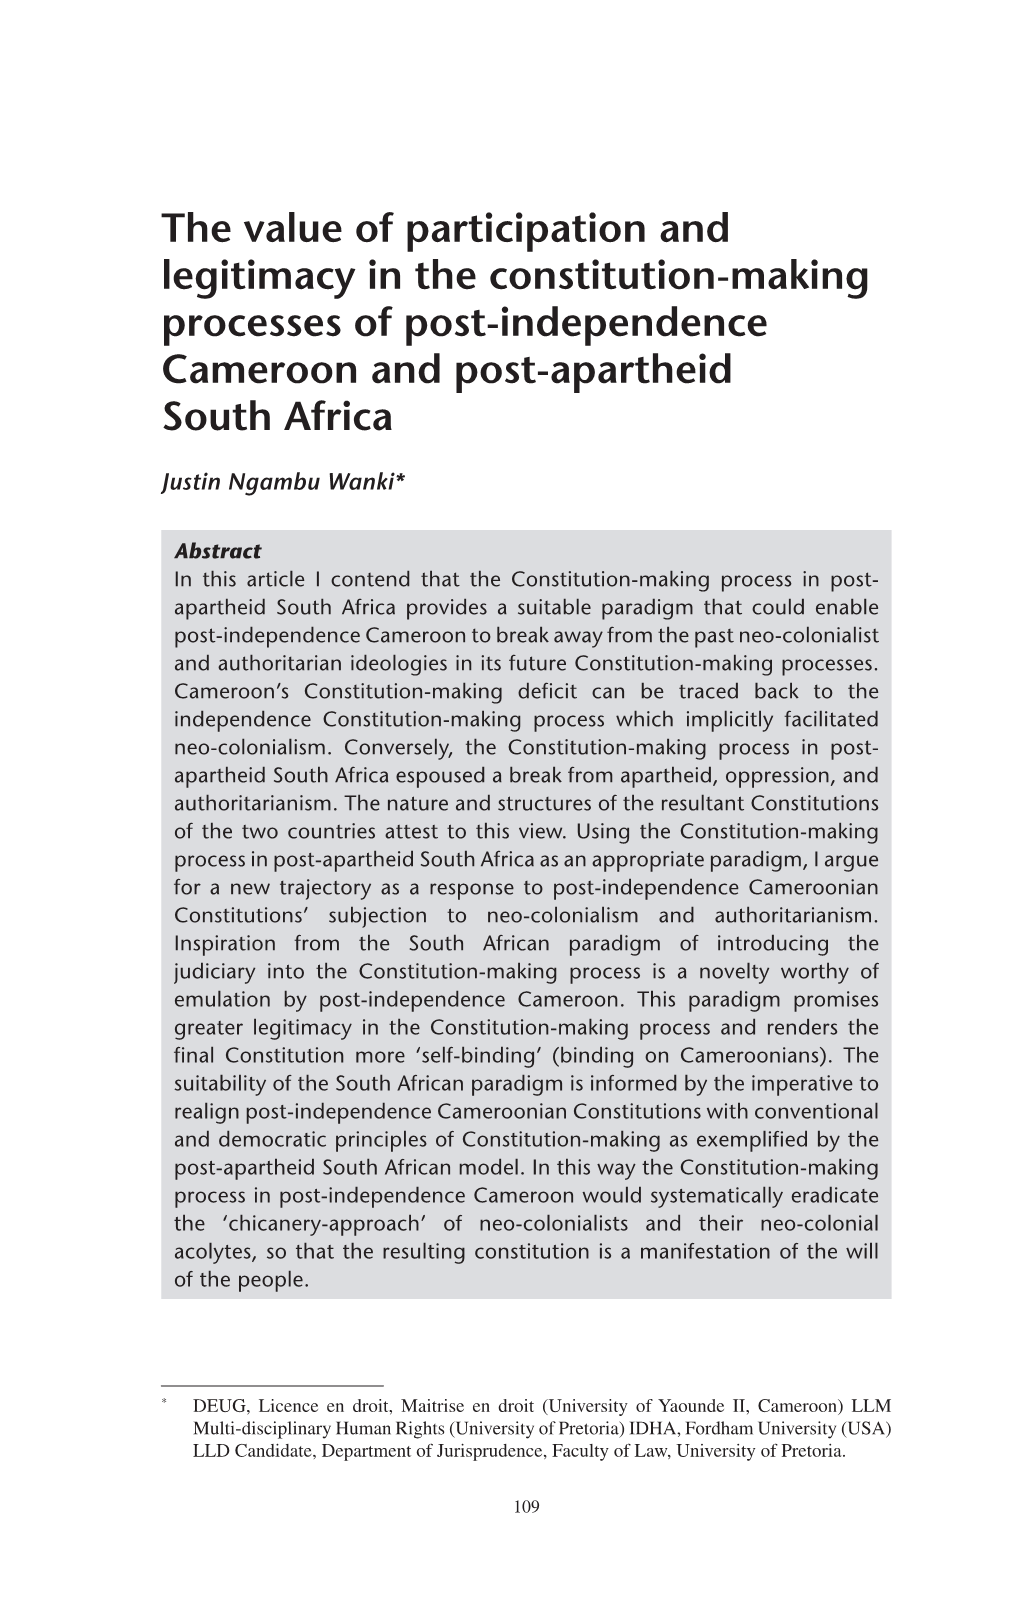 The Value of Participation and Legitimacy in the Constitution-Making Processes of Post-Independence Cameroon and Post-Apartheid South Africa